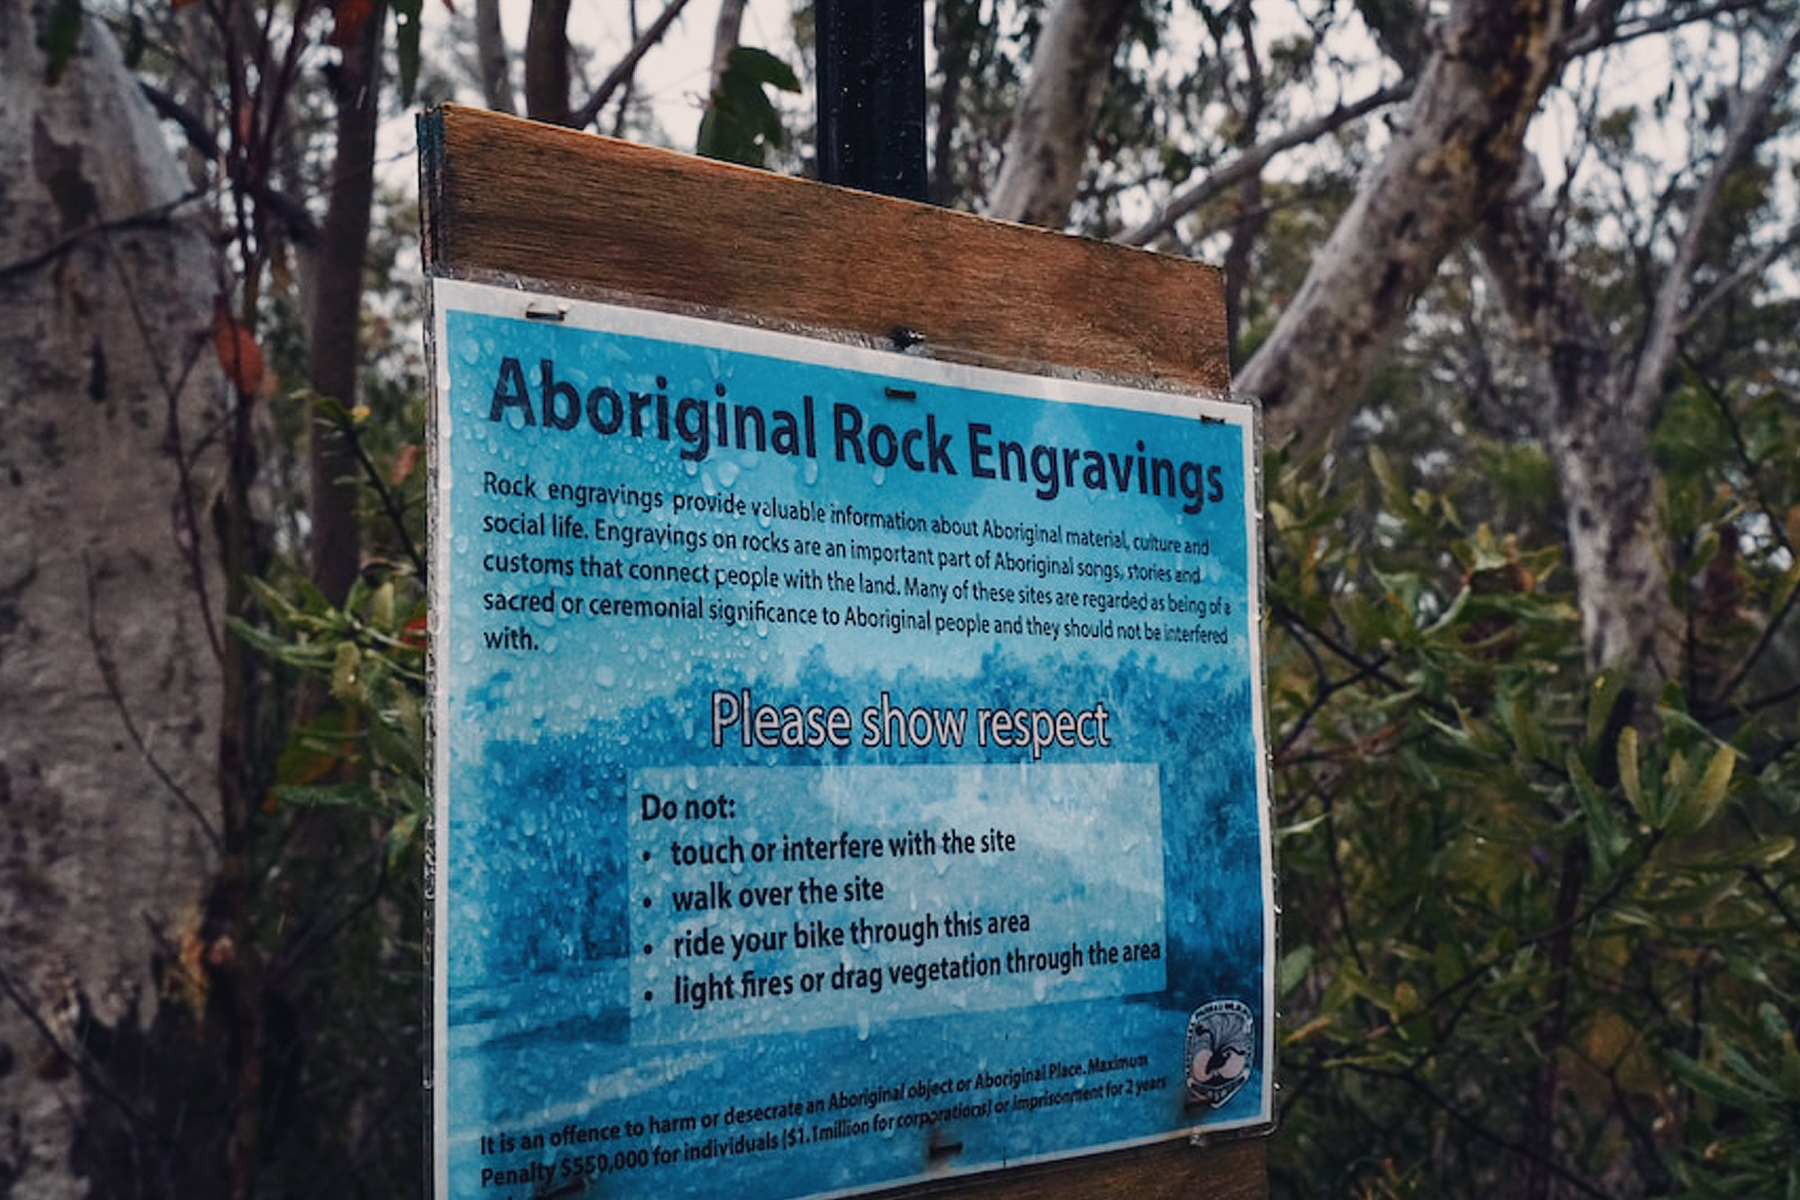 The NPWS has put signage in place at the Bulgandry Aboriginal art site